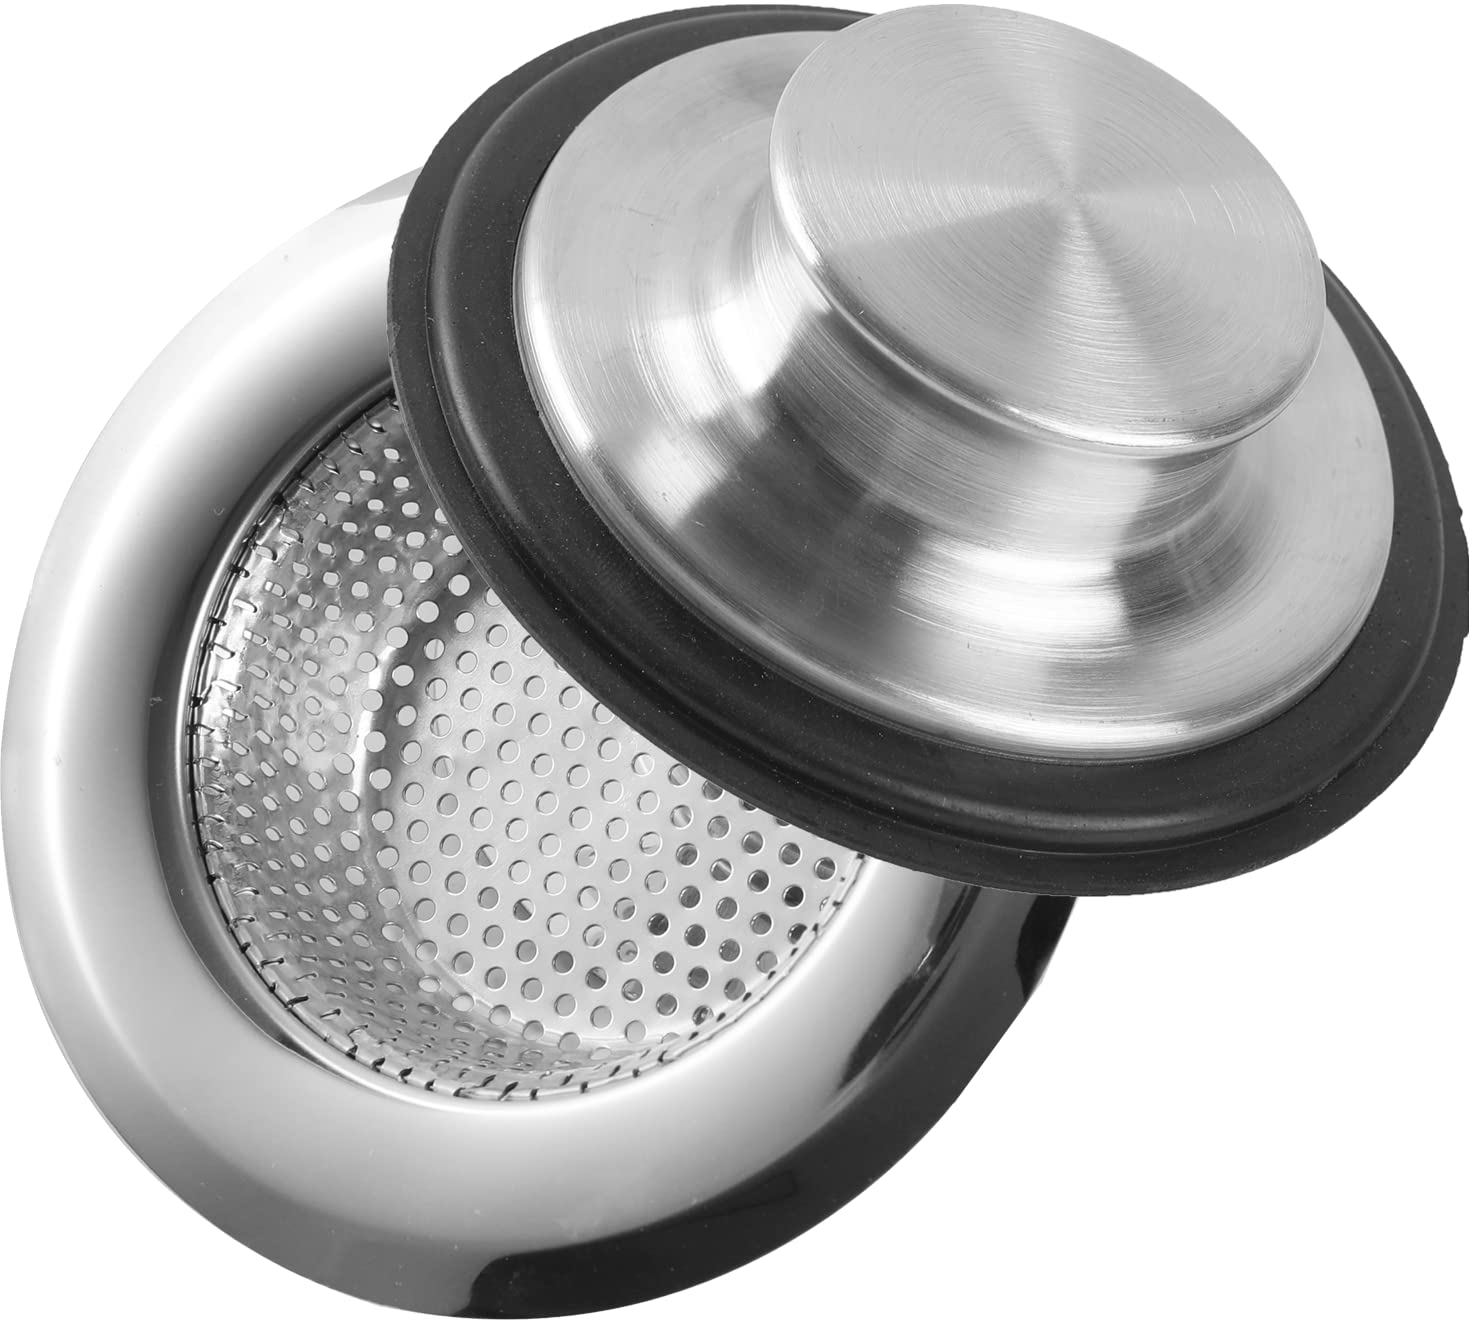 (Combo Pack) Stainless Steel Kitchen Sink Strainer and Stopper - 4.5” x 2.75” x 1” Strainer and 3.35” x 1.18” Stopper- Strainer with 2 mm Holes and Stopper with Strong Rubber Seal and Round Knob Grip